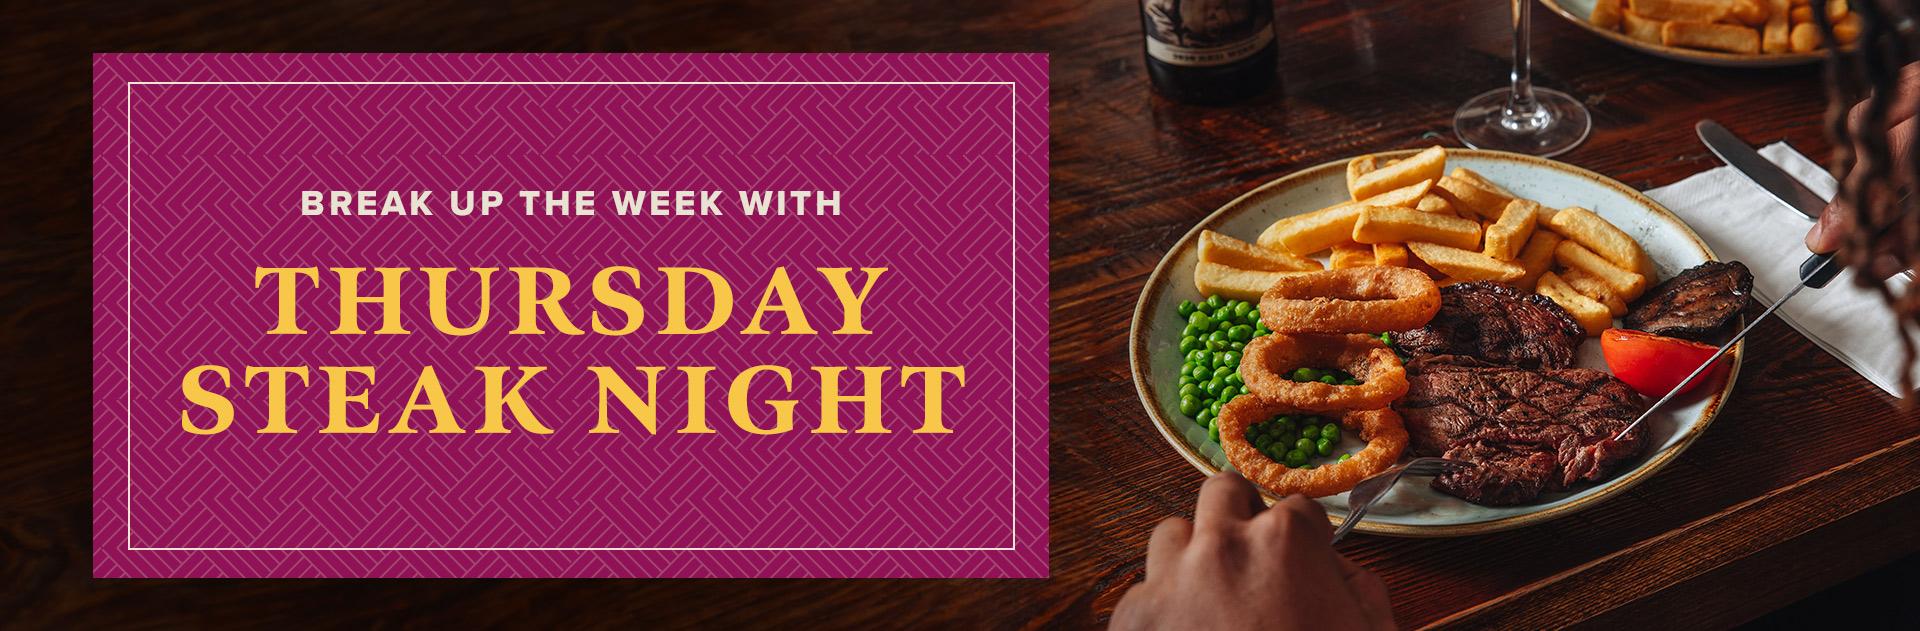 Thursday Steak Night at The Rose and Crown